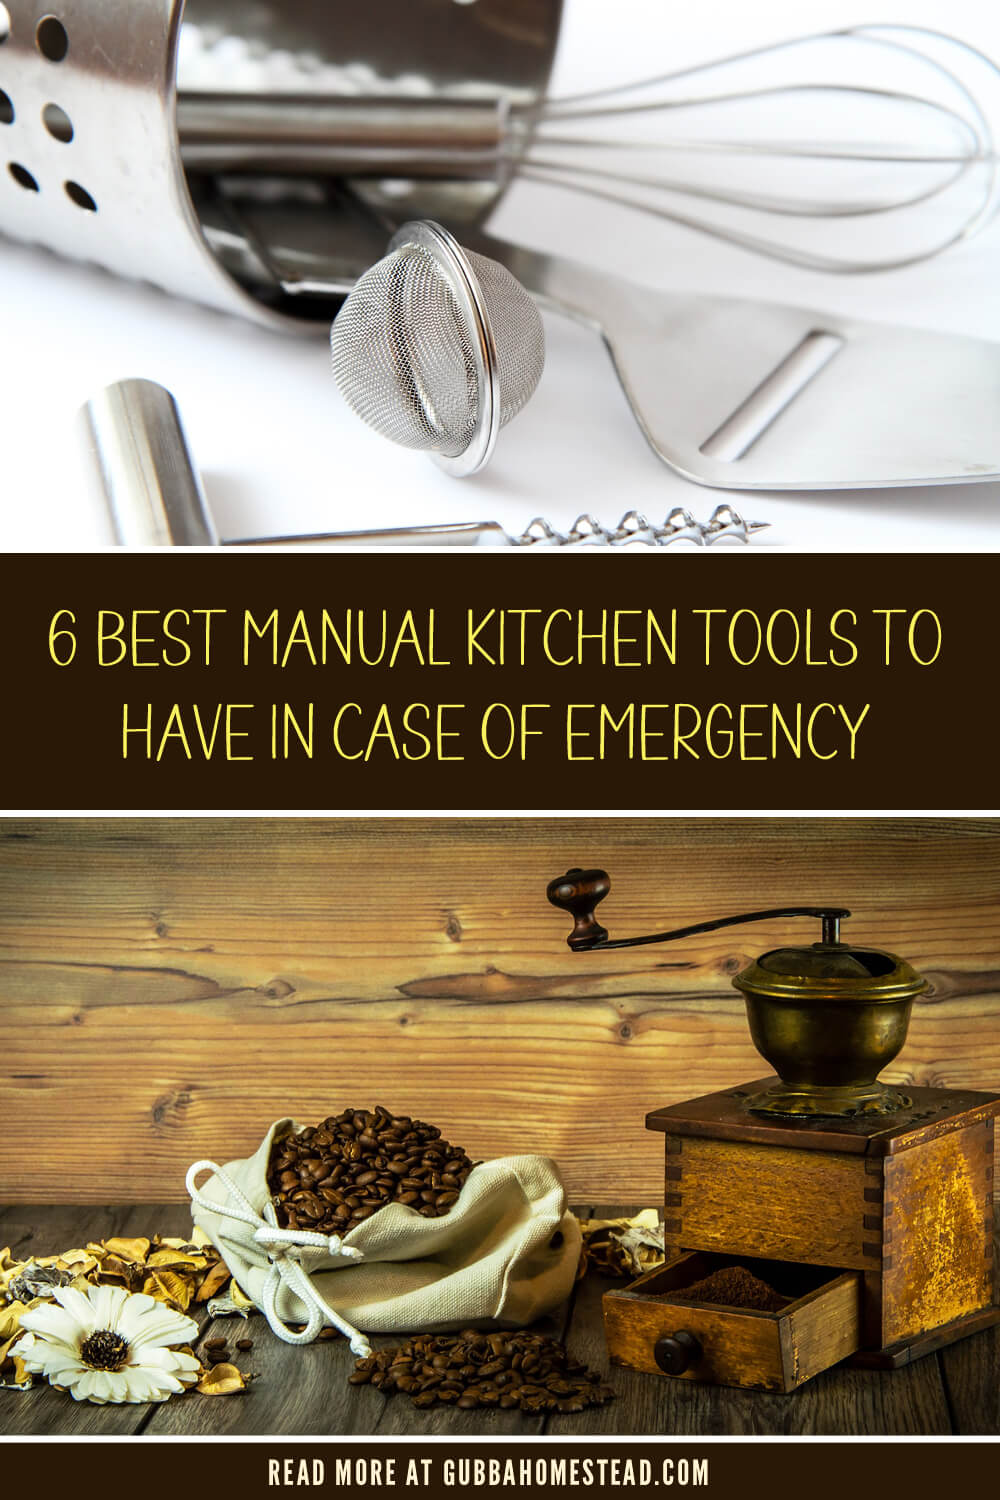 6 Best Manual Kitchen Tools To Have In Case Of Emergency